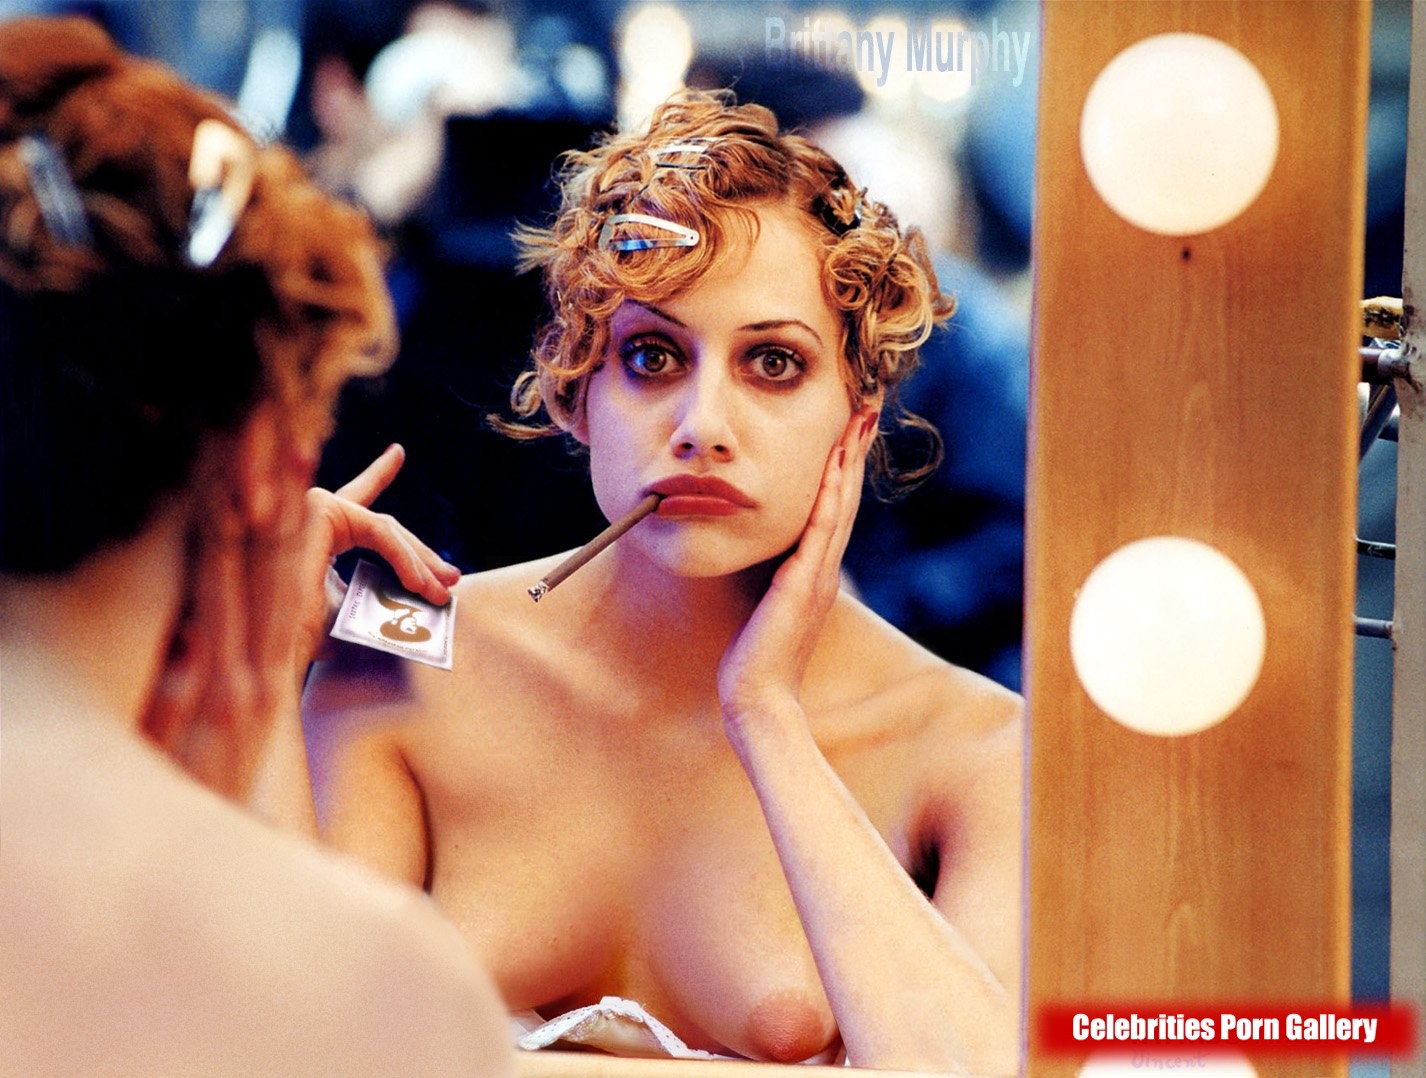 Murphy naked pictures of brittany Brittany Murphy. 